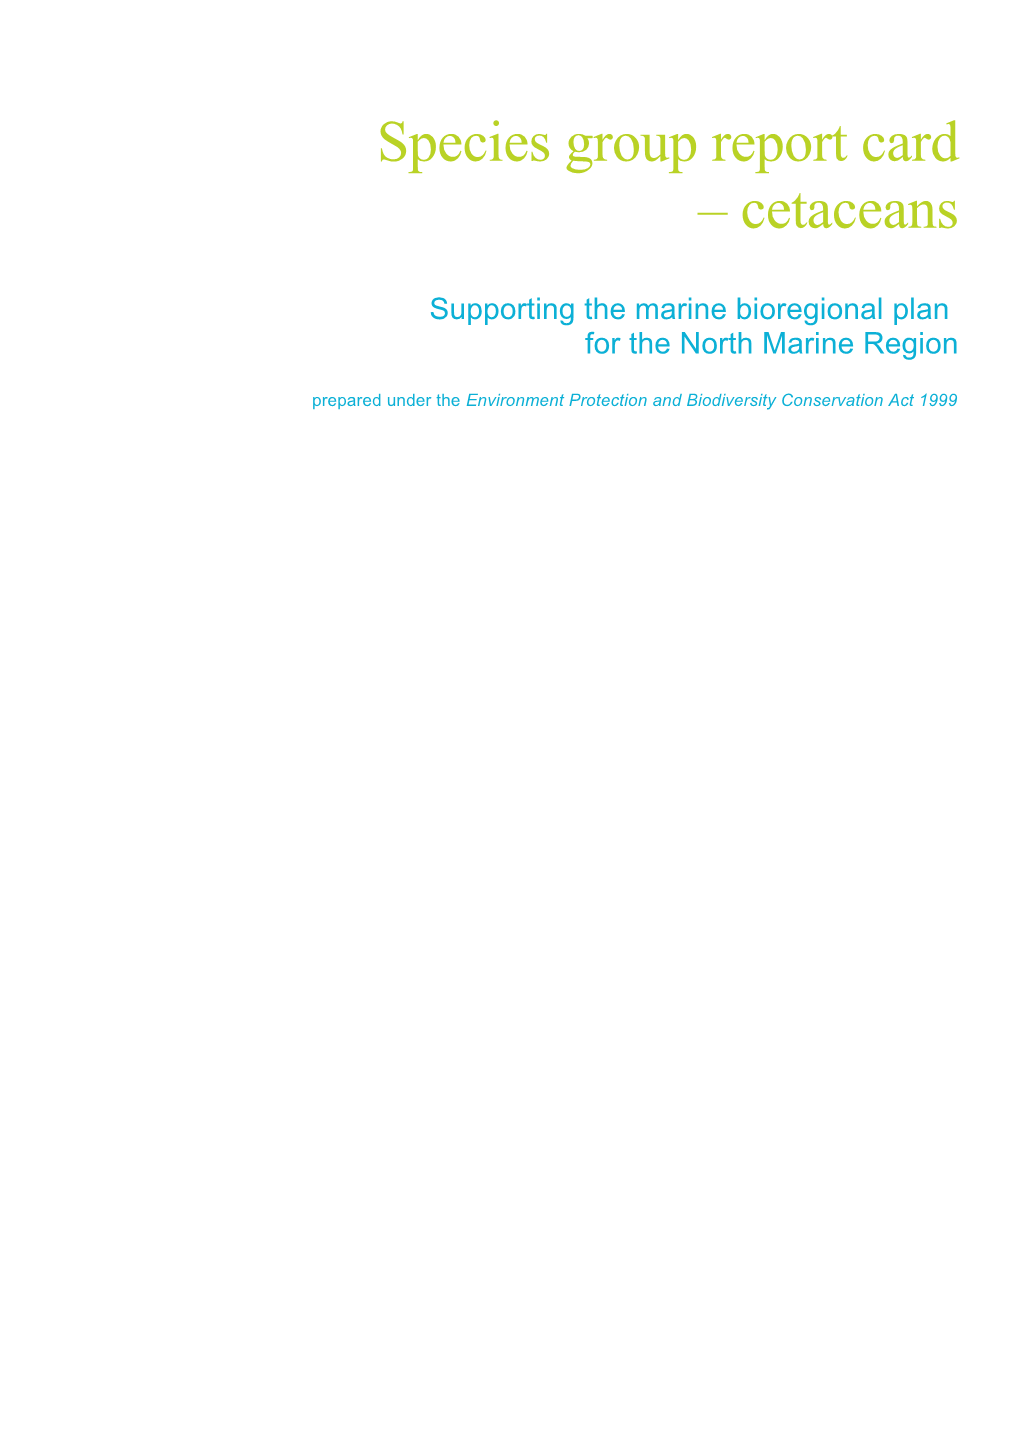 Species Group Report Card - Cetaceans - Supporting the Marine Bioregional Plan for The